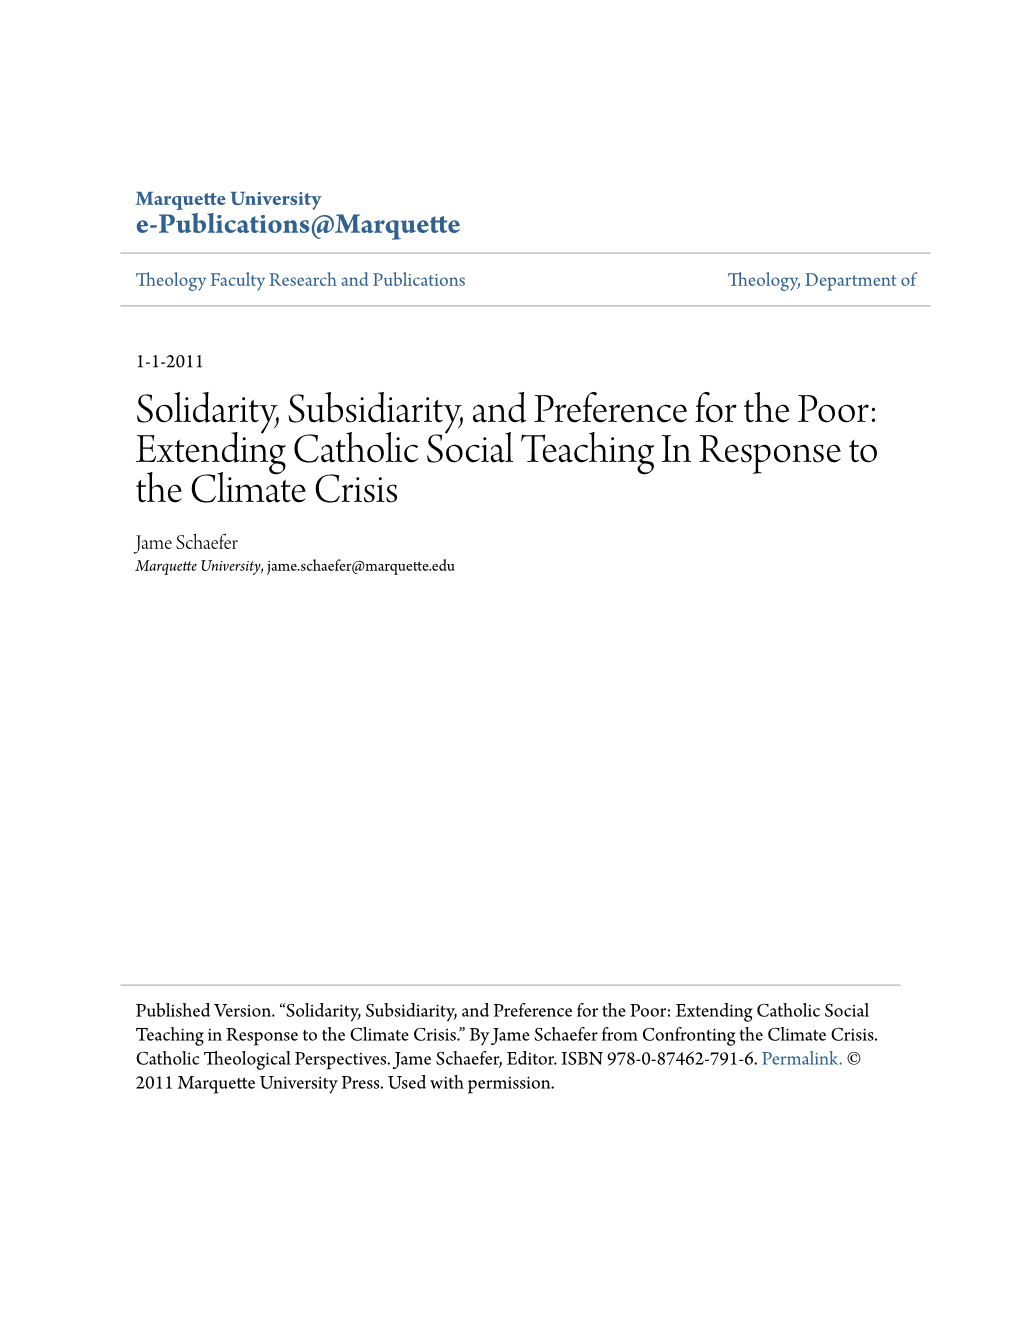 Solidarity, Subsidiarity, and Preference for the Poor: Extending Catholic Social Teaching in Response to the Climate Crisis